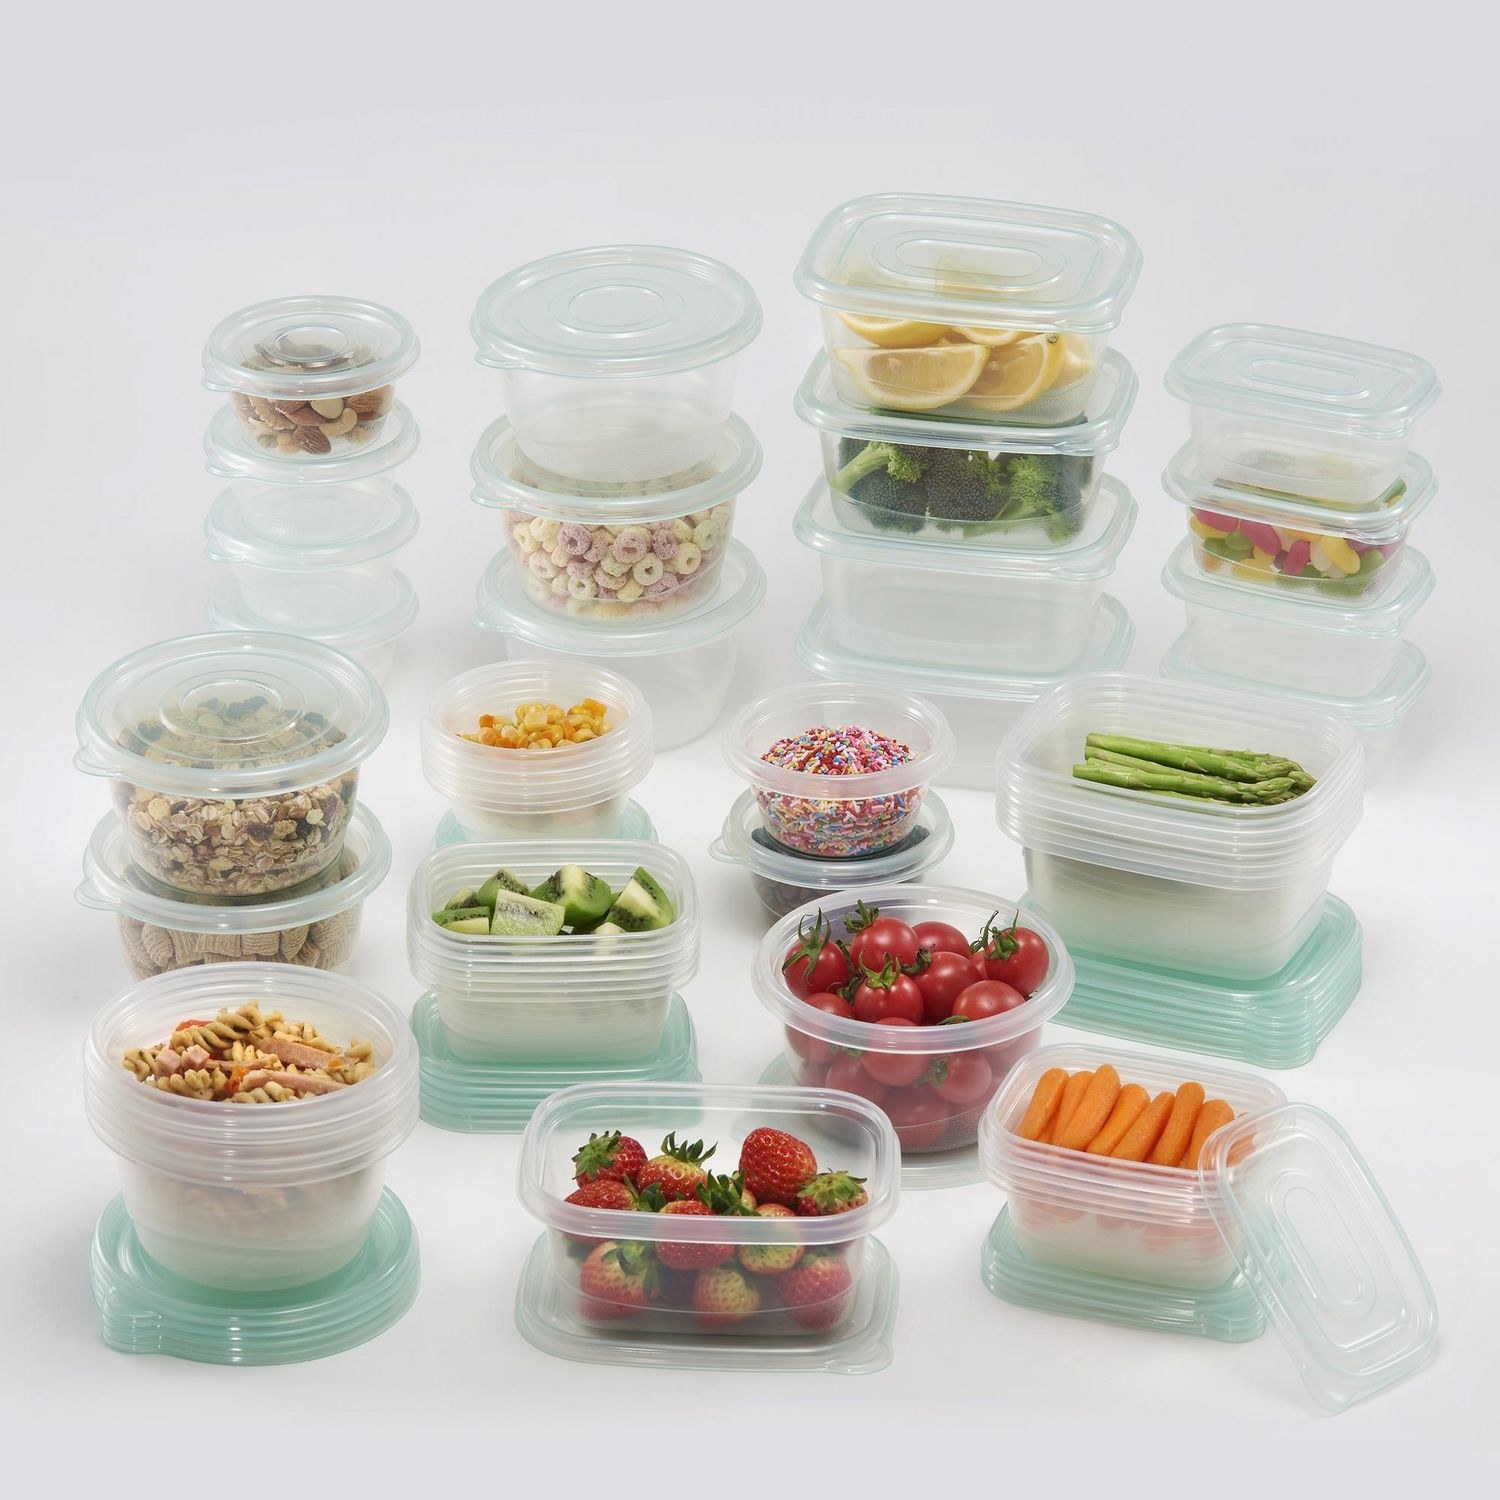 The 92-piece food container set